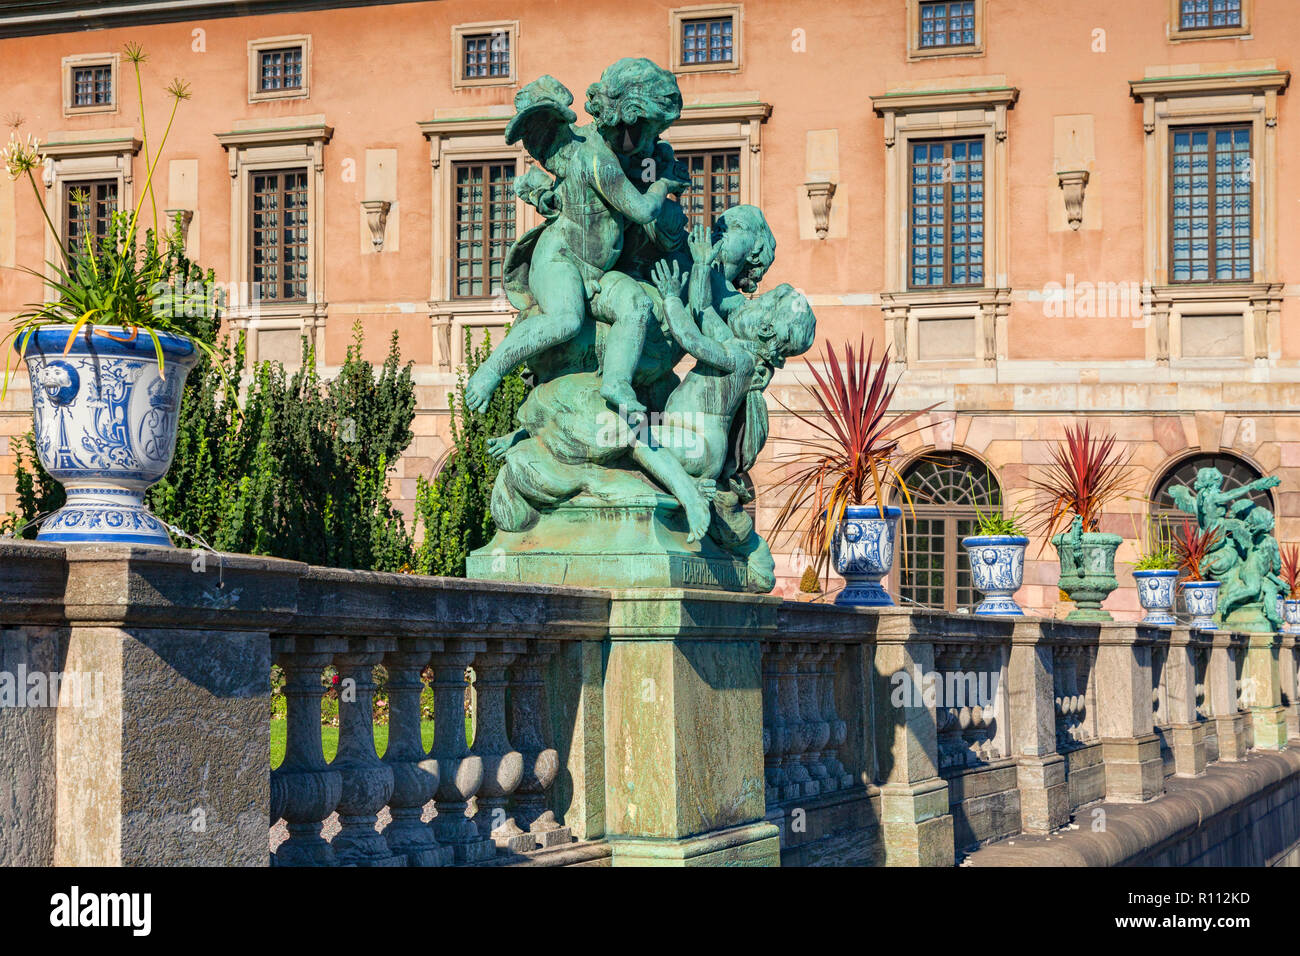 16 September 2018: Stockholm, Sweden - Detail of balustrade at Royal Palace, with urns full of plants and a cherub sculpture. Stock Photo